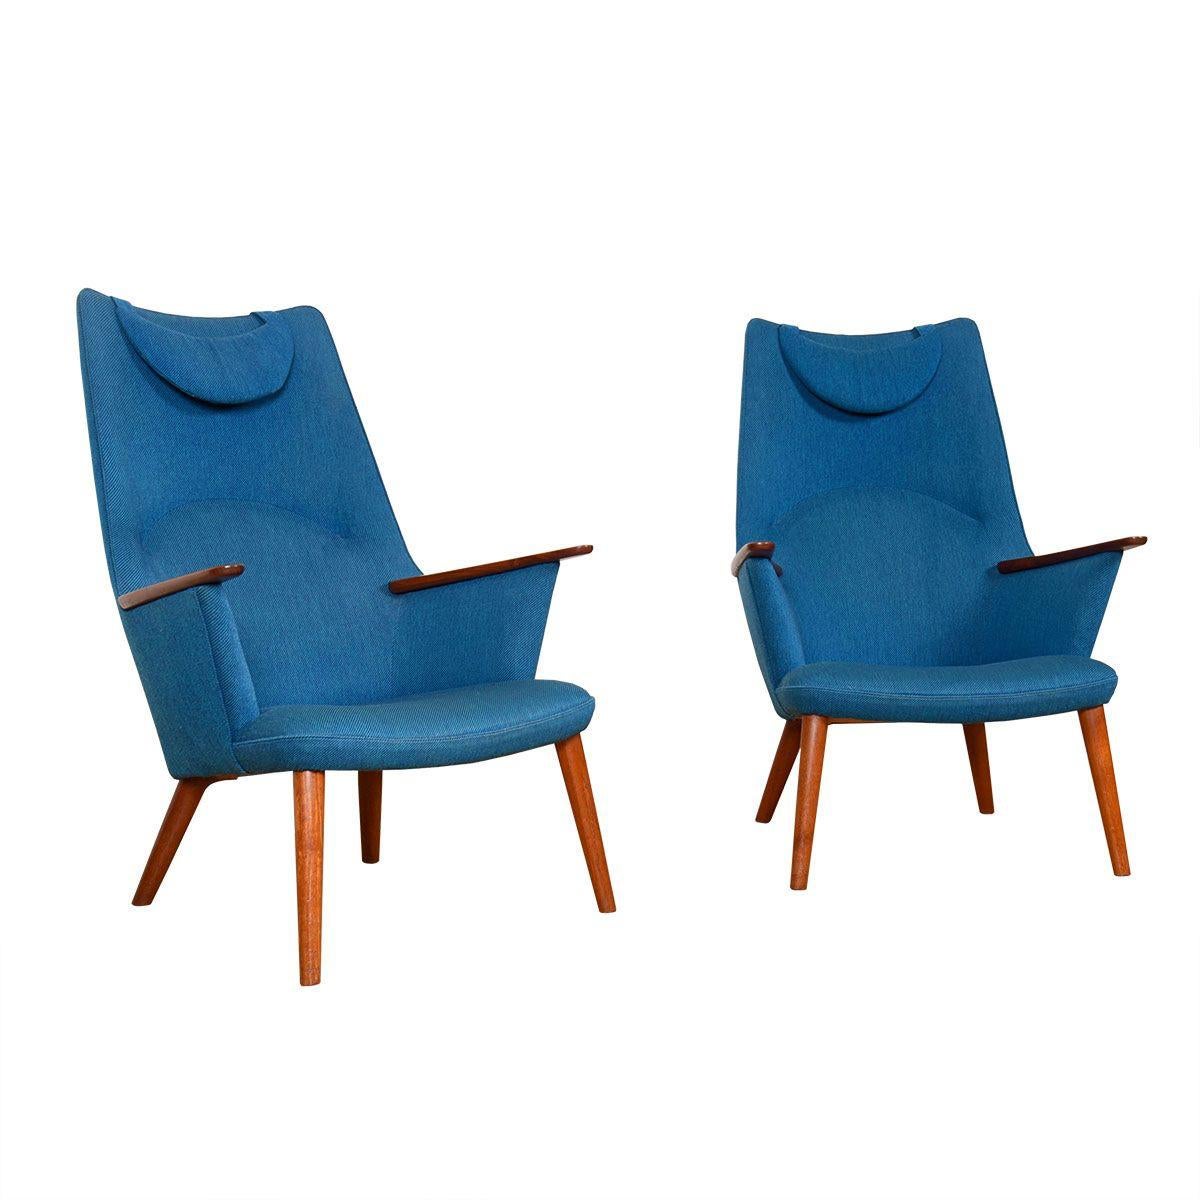 Designed in 1954 by Hans Wegner, the AP-27 Chair, popularly known as the “Mama Bear” Easy Lounge Chair, is a scarce and highly valued example of mid century design by one of the masters of Danish craftsmanship….to have a pair is heaven..

The